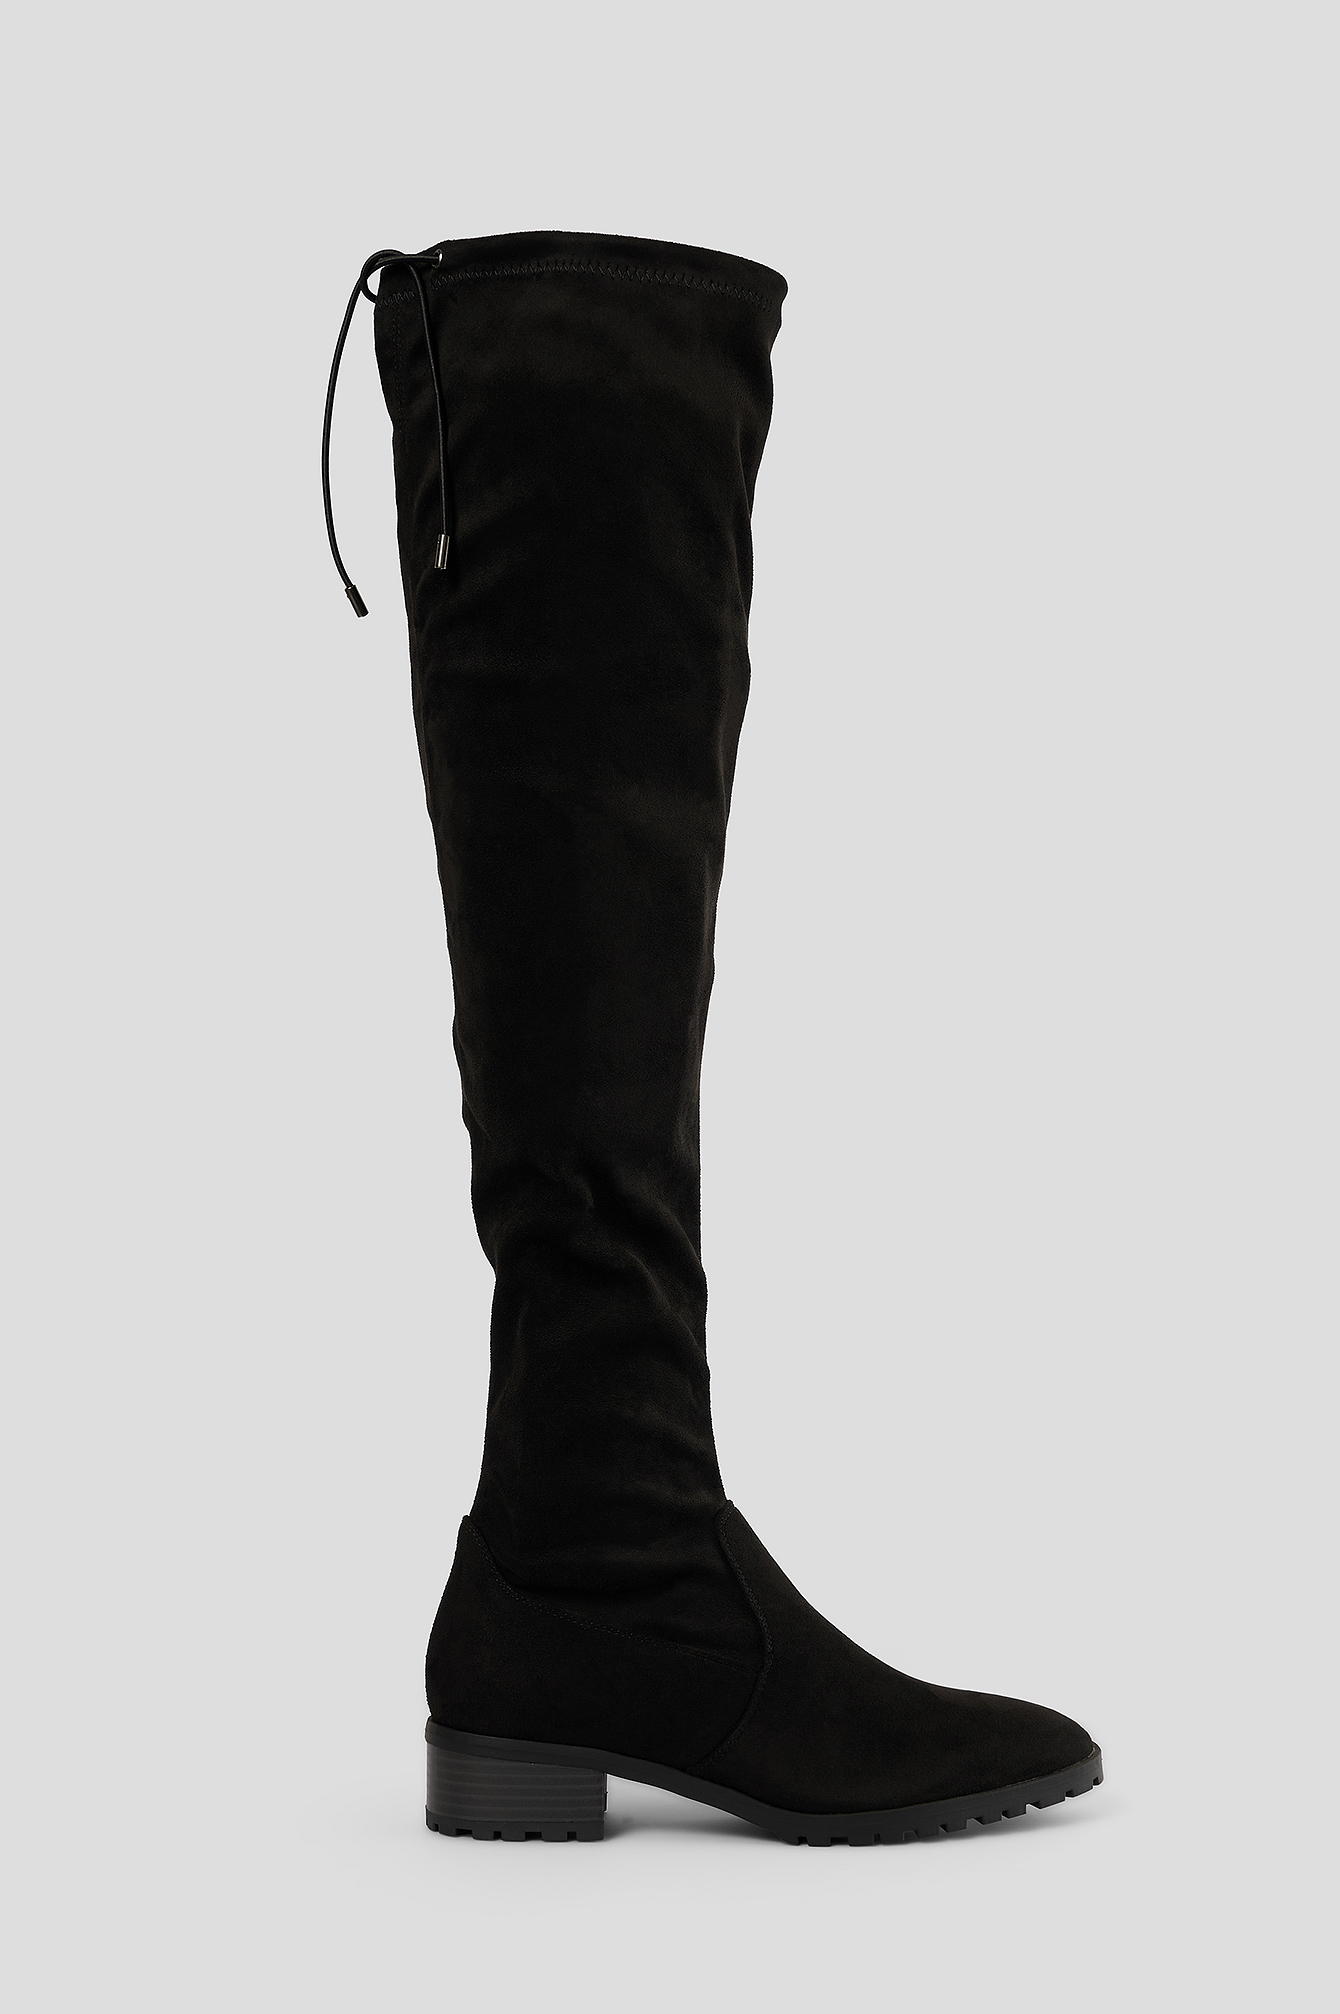 Womens Knee High boots | Find perfect boots at NA-KD | na-kd.com